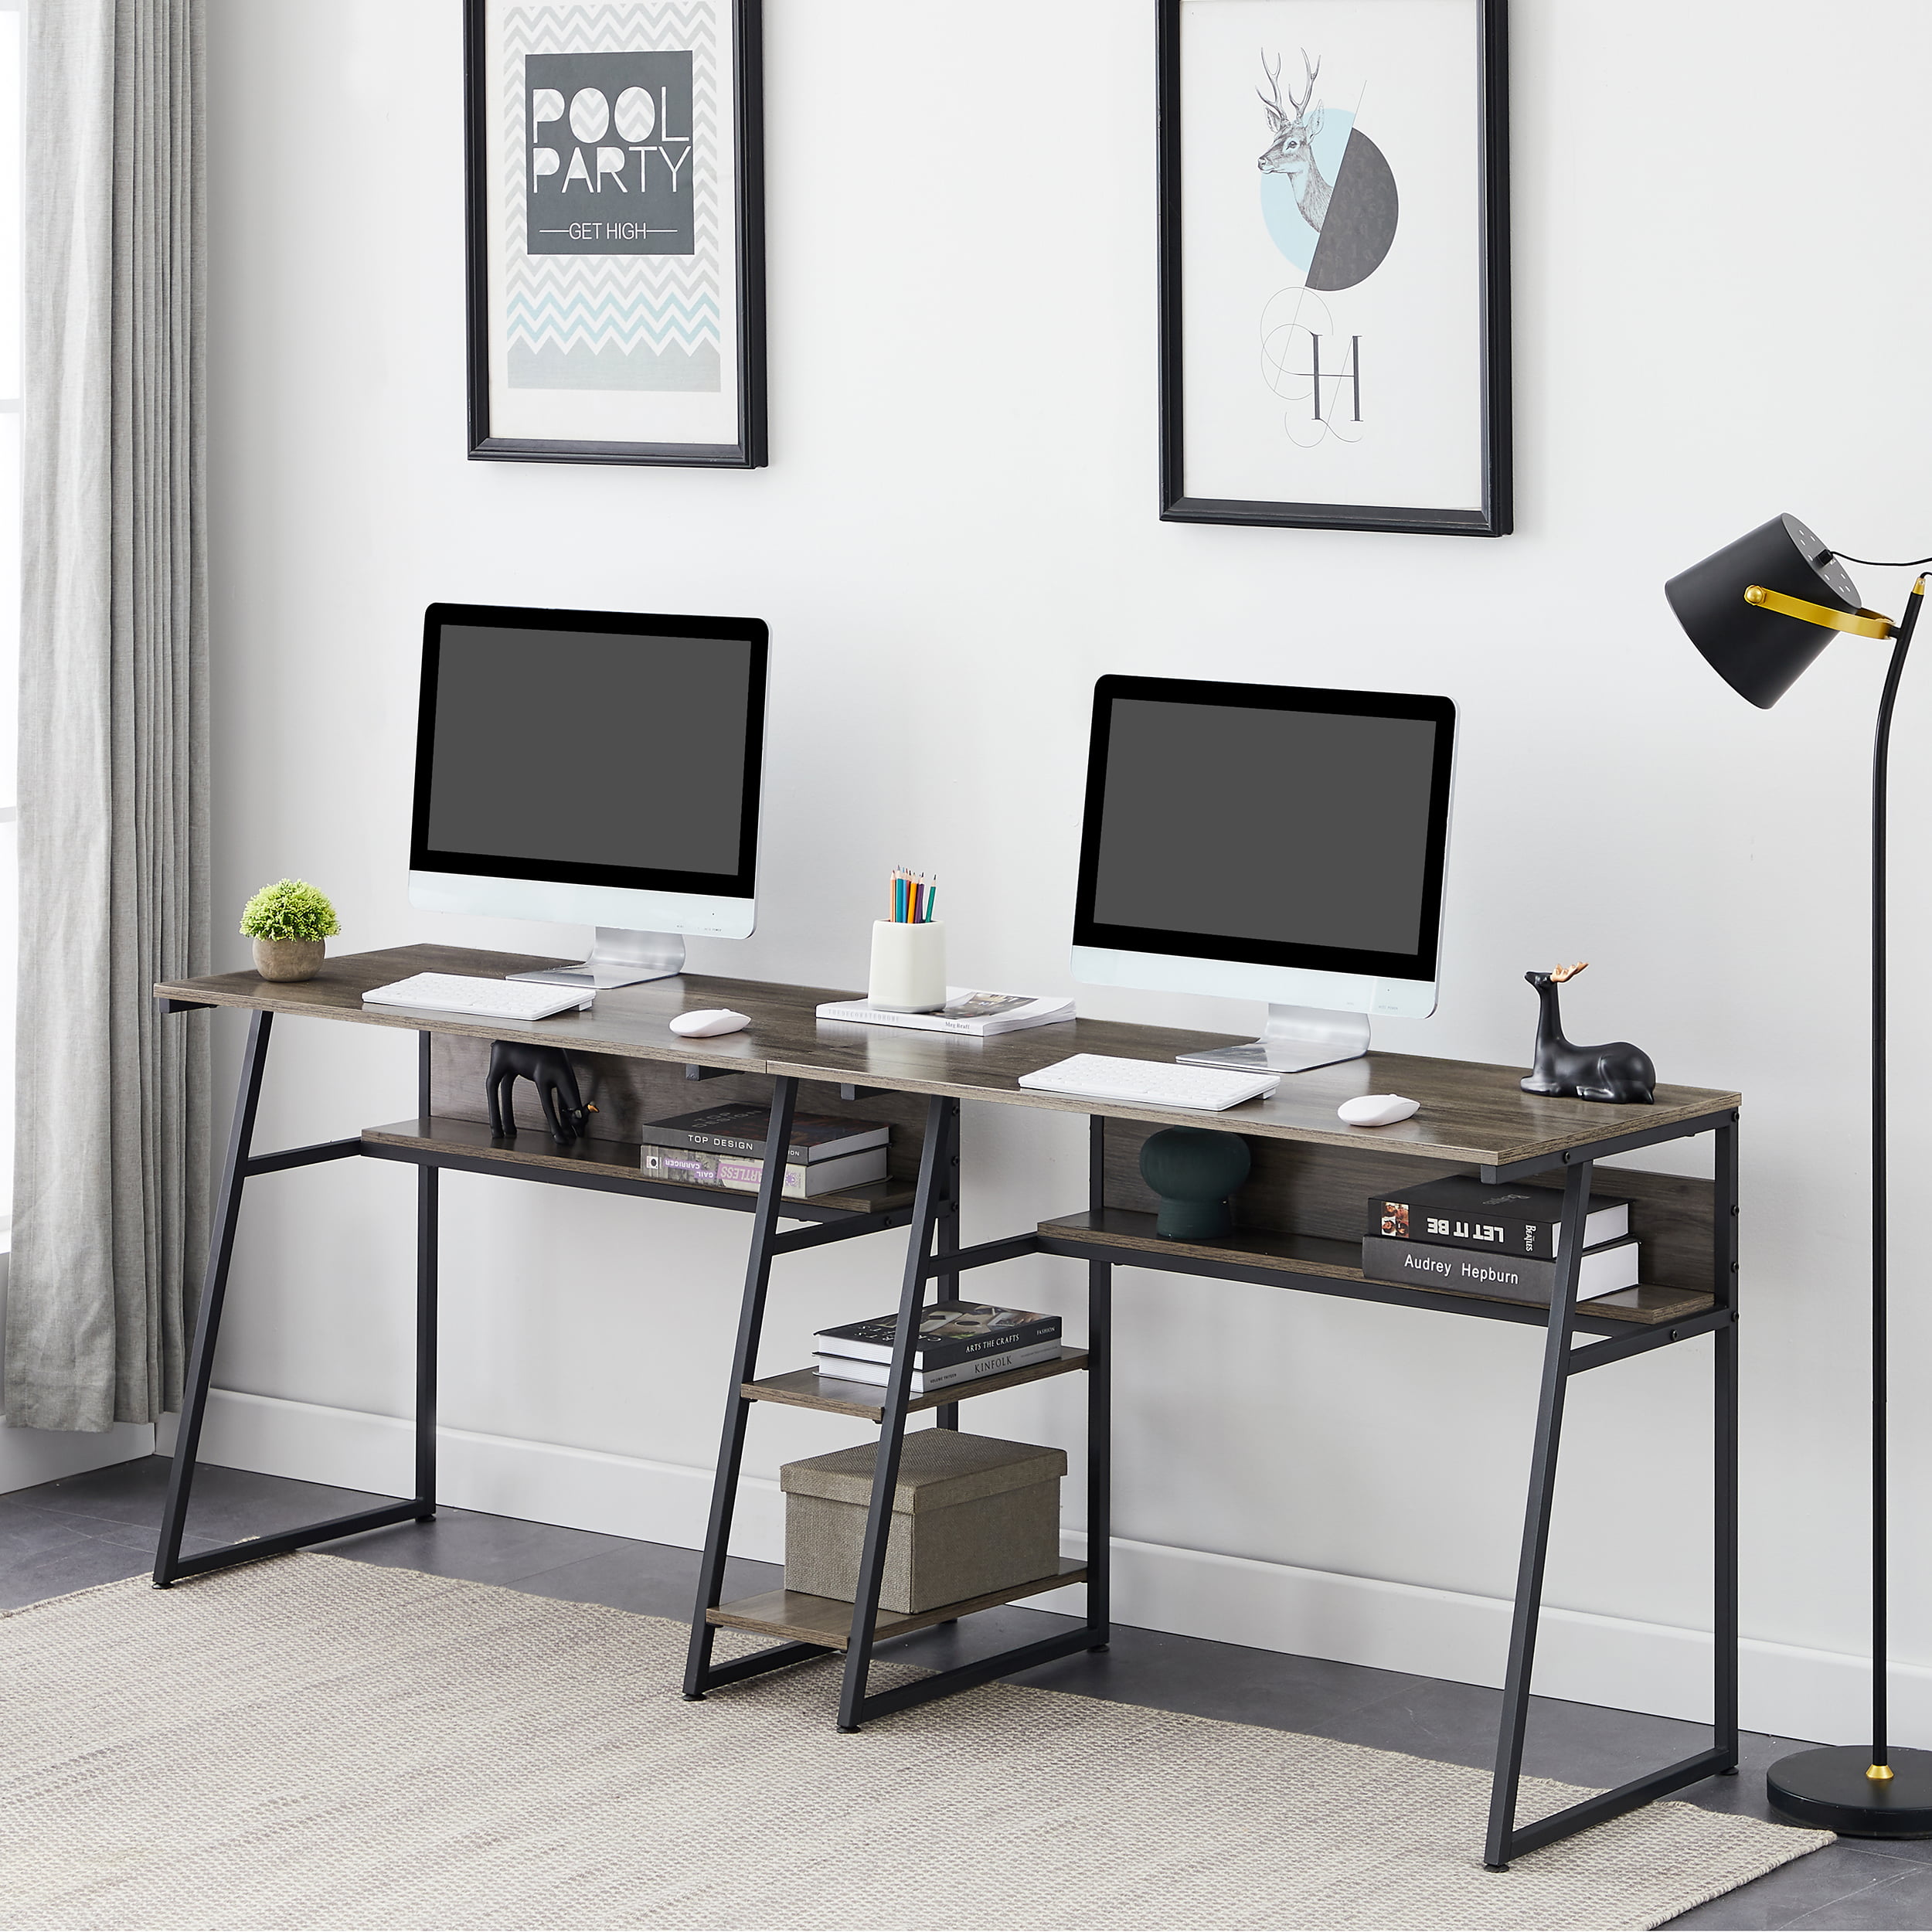 Details about   Two Person Computer Desk Double Workstations desk For Home Office w/ Storage US 